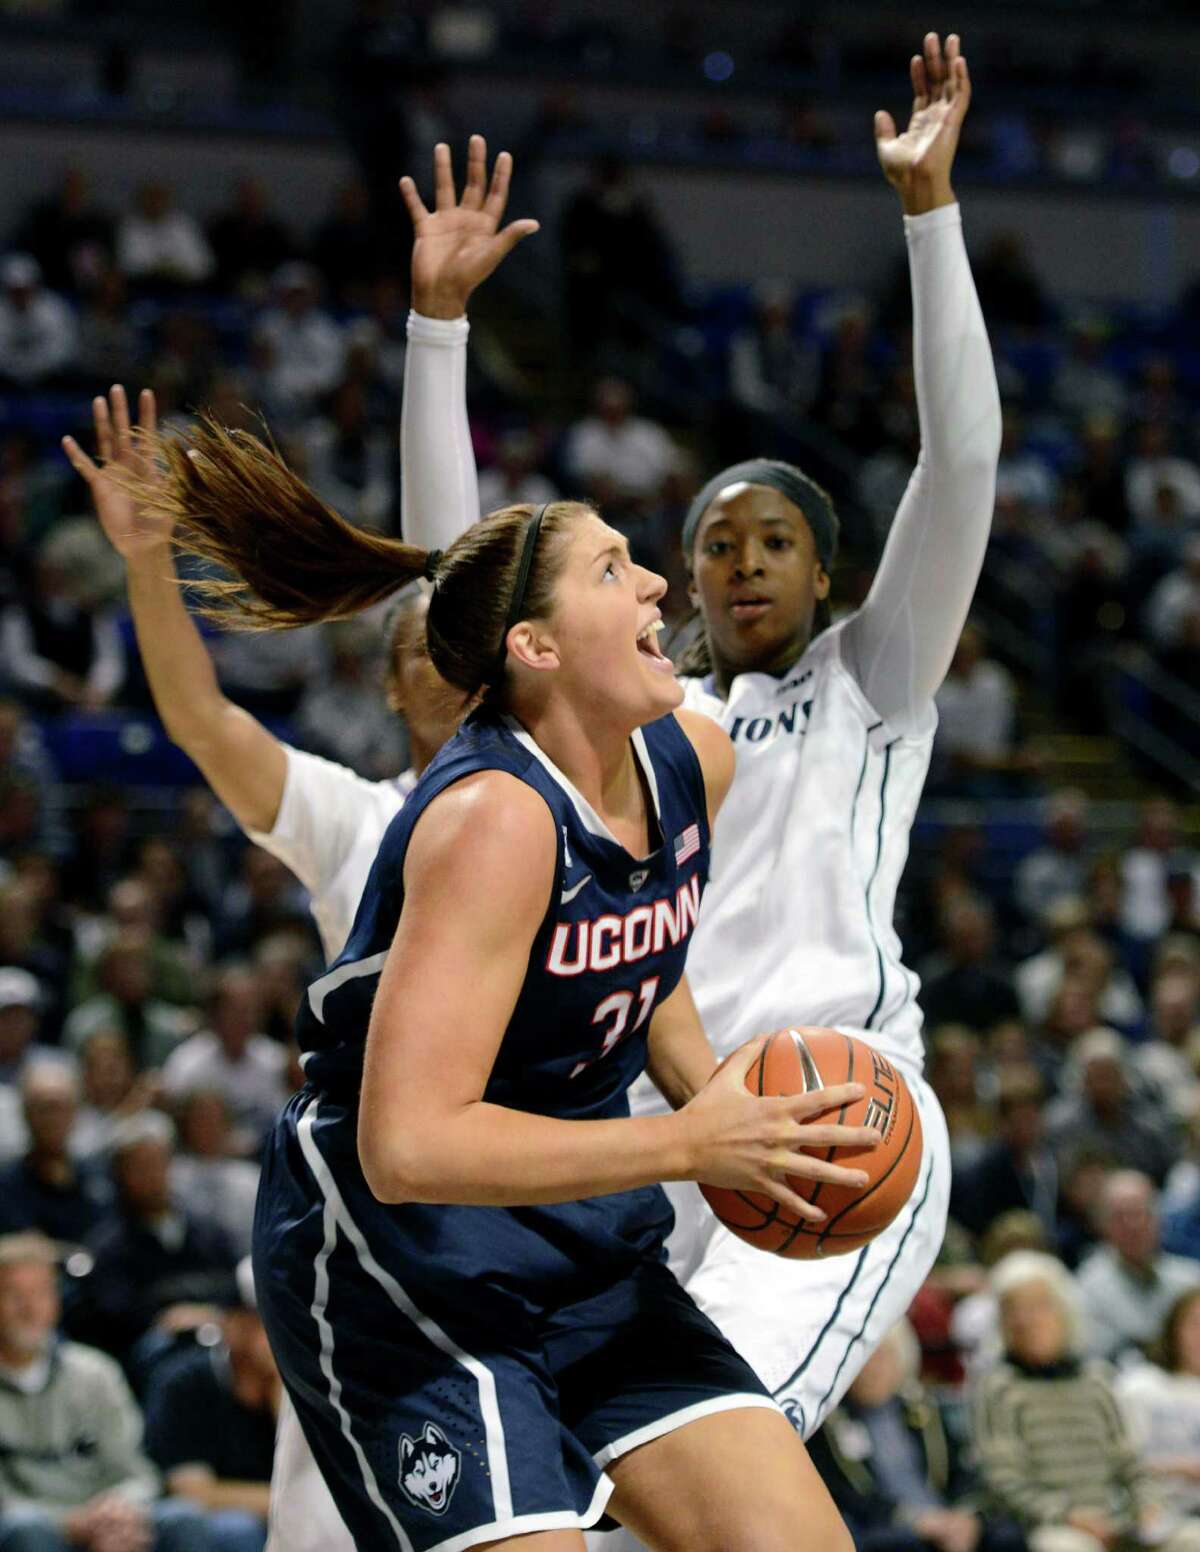 Sidelined by an injury, Connecticut's Kaleena Mosqueda-Lewis (23) catches balls for teammates before an NCAA college basketball game against Penn State, Sunday, Nov. 17, 2013, in State College, Pa.